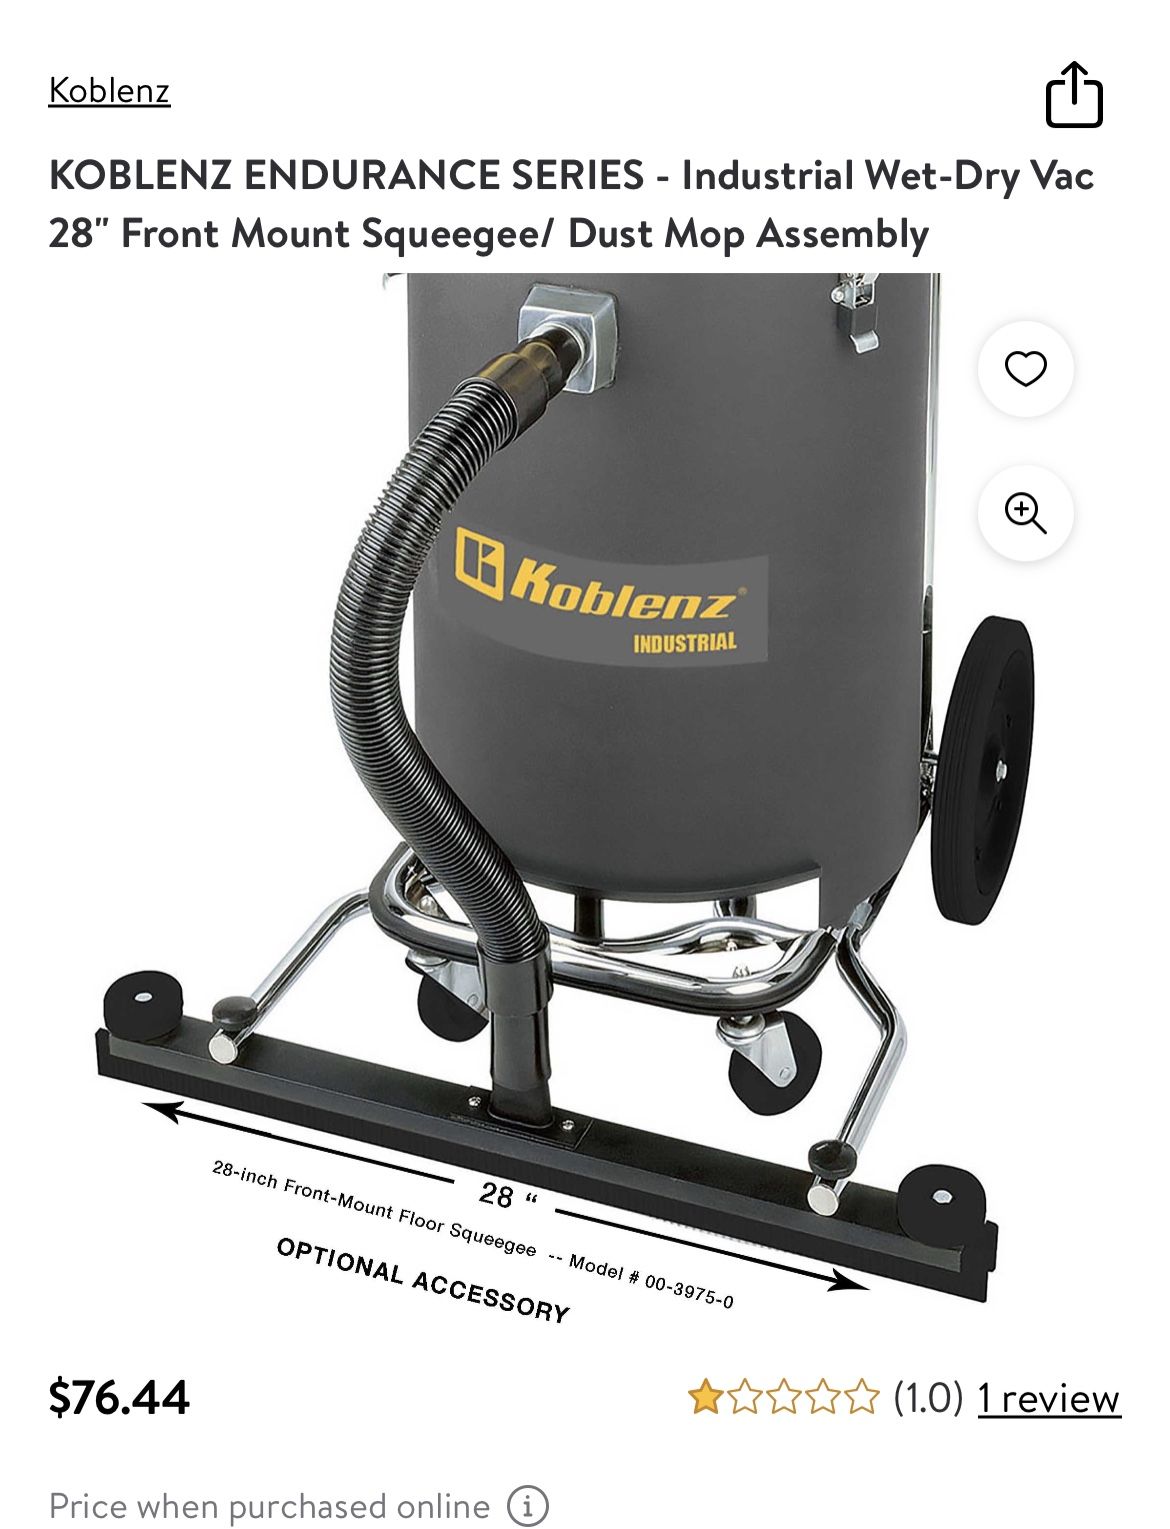 KOBLENZ ENDURANCE SERIES - Industrial Wet-Dry Vac 28" Front Mount Squeegee/ Dust Mop Assembly